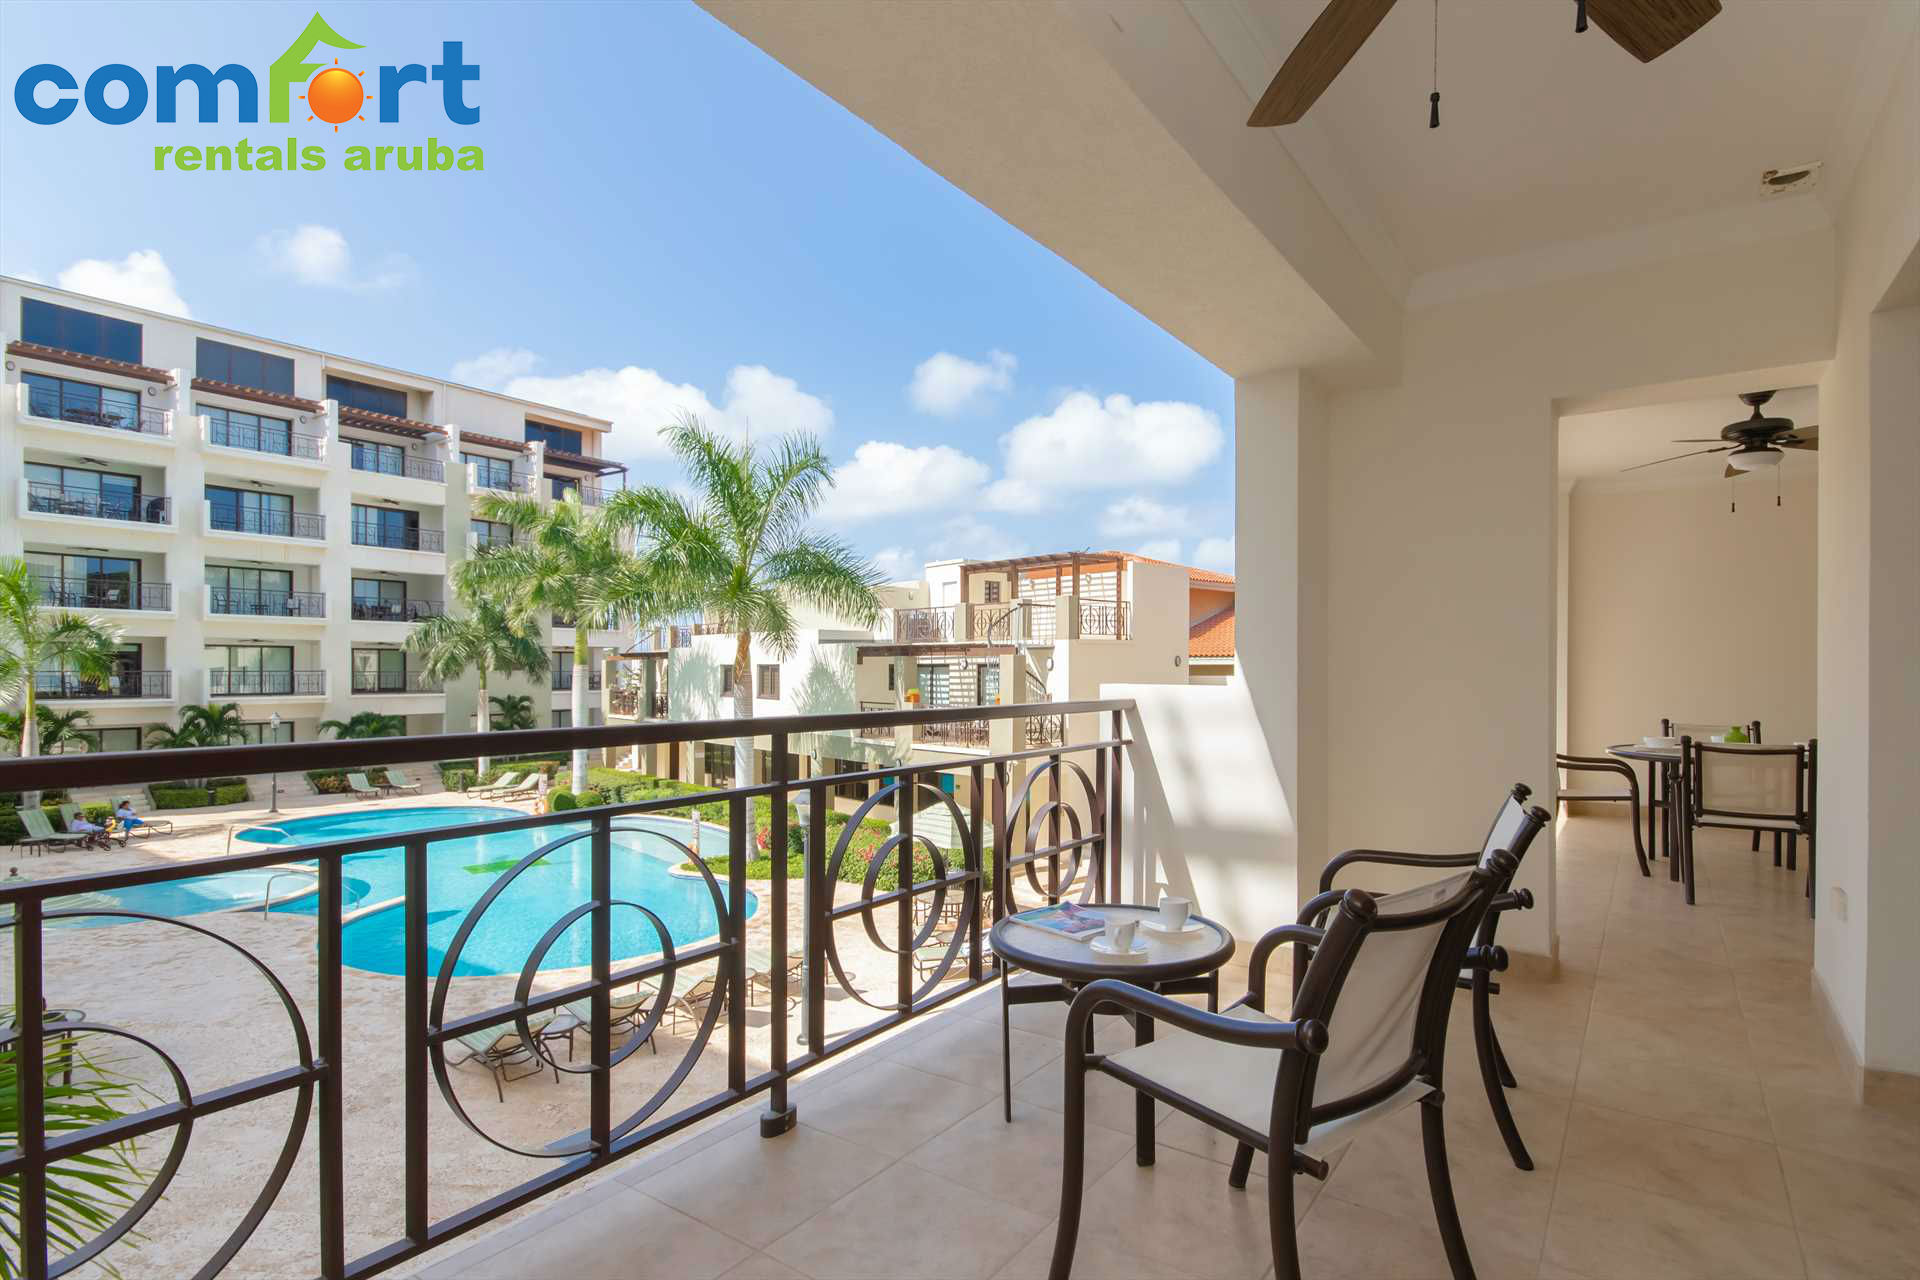 Lounge out on your spacious double balcony and enjoy Aruba's signature weather